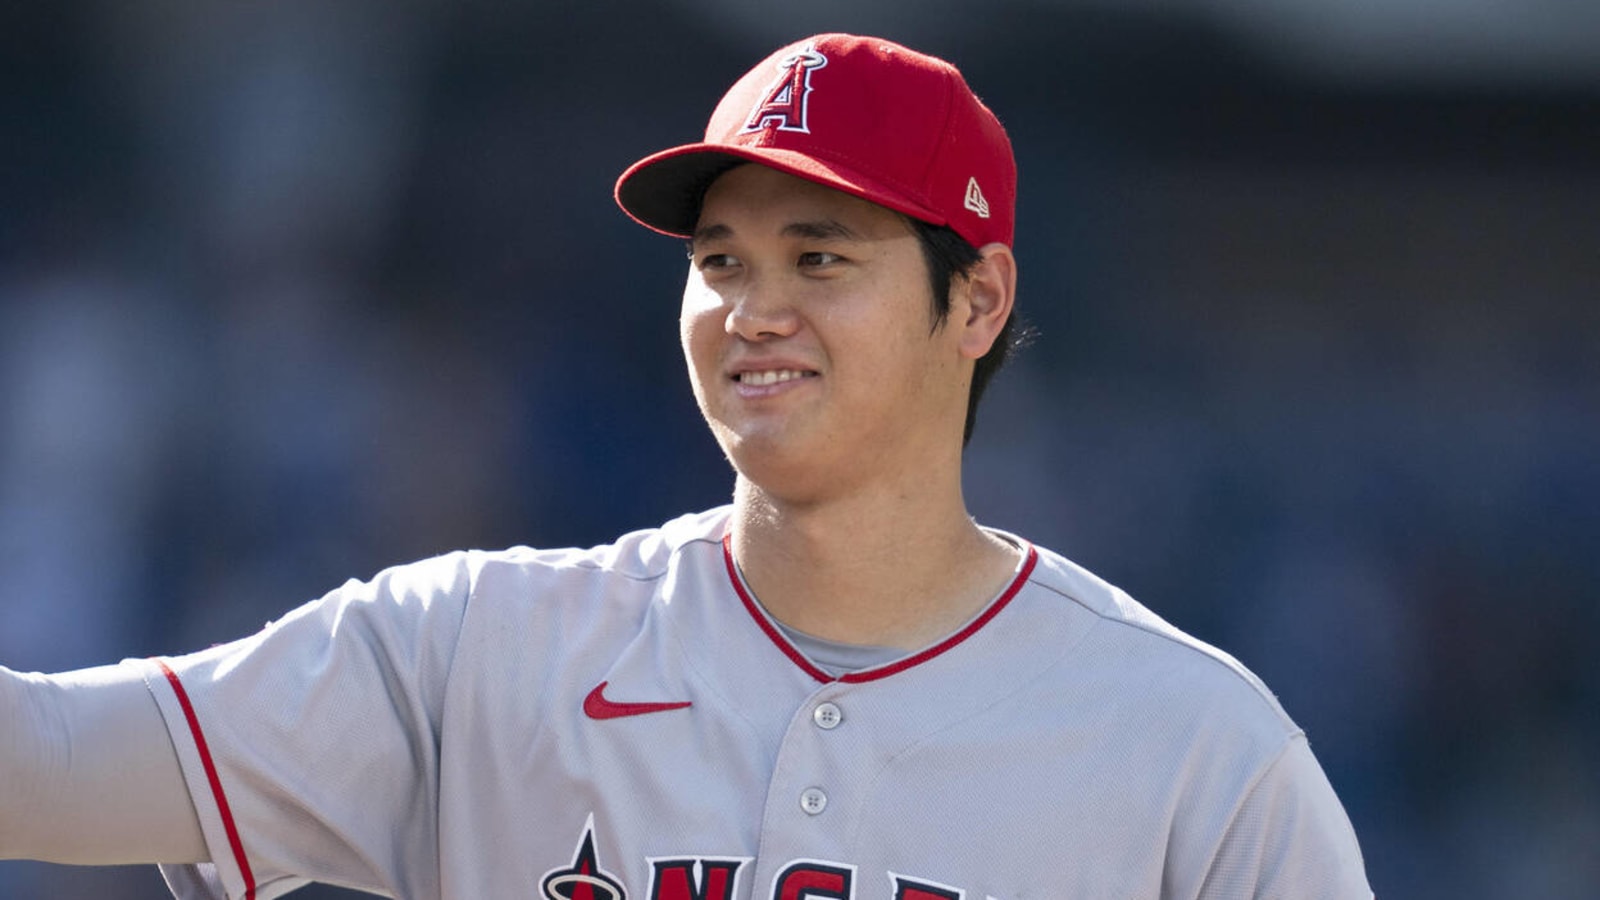 Shohei Ohtani once light-heartedly expressed his desire to sport Mike  Trout's #27 jersey ahead of his MLB debut